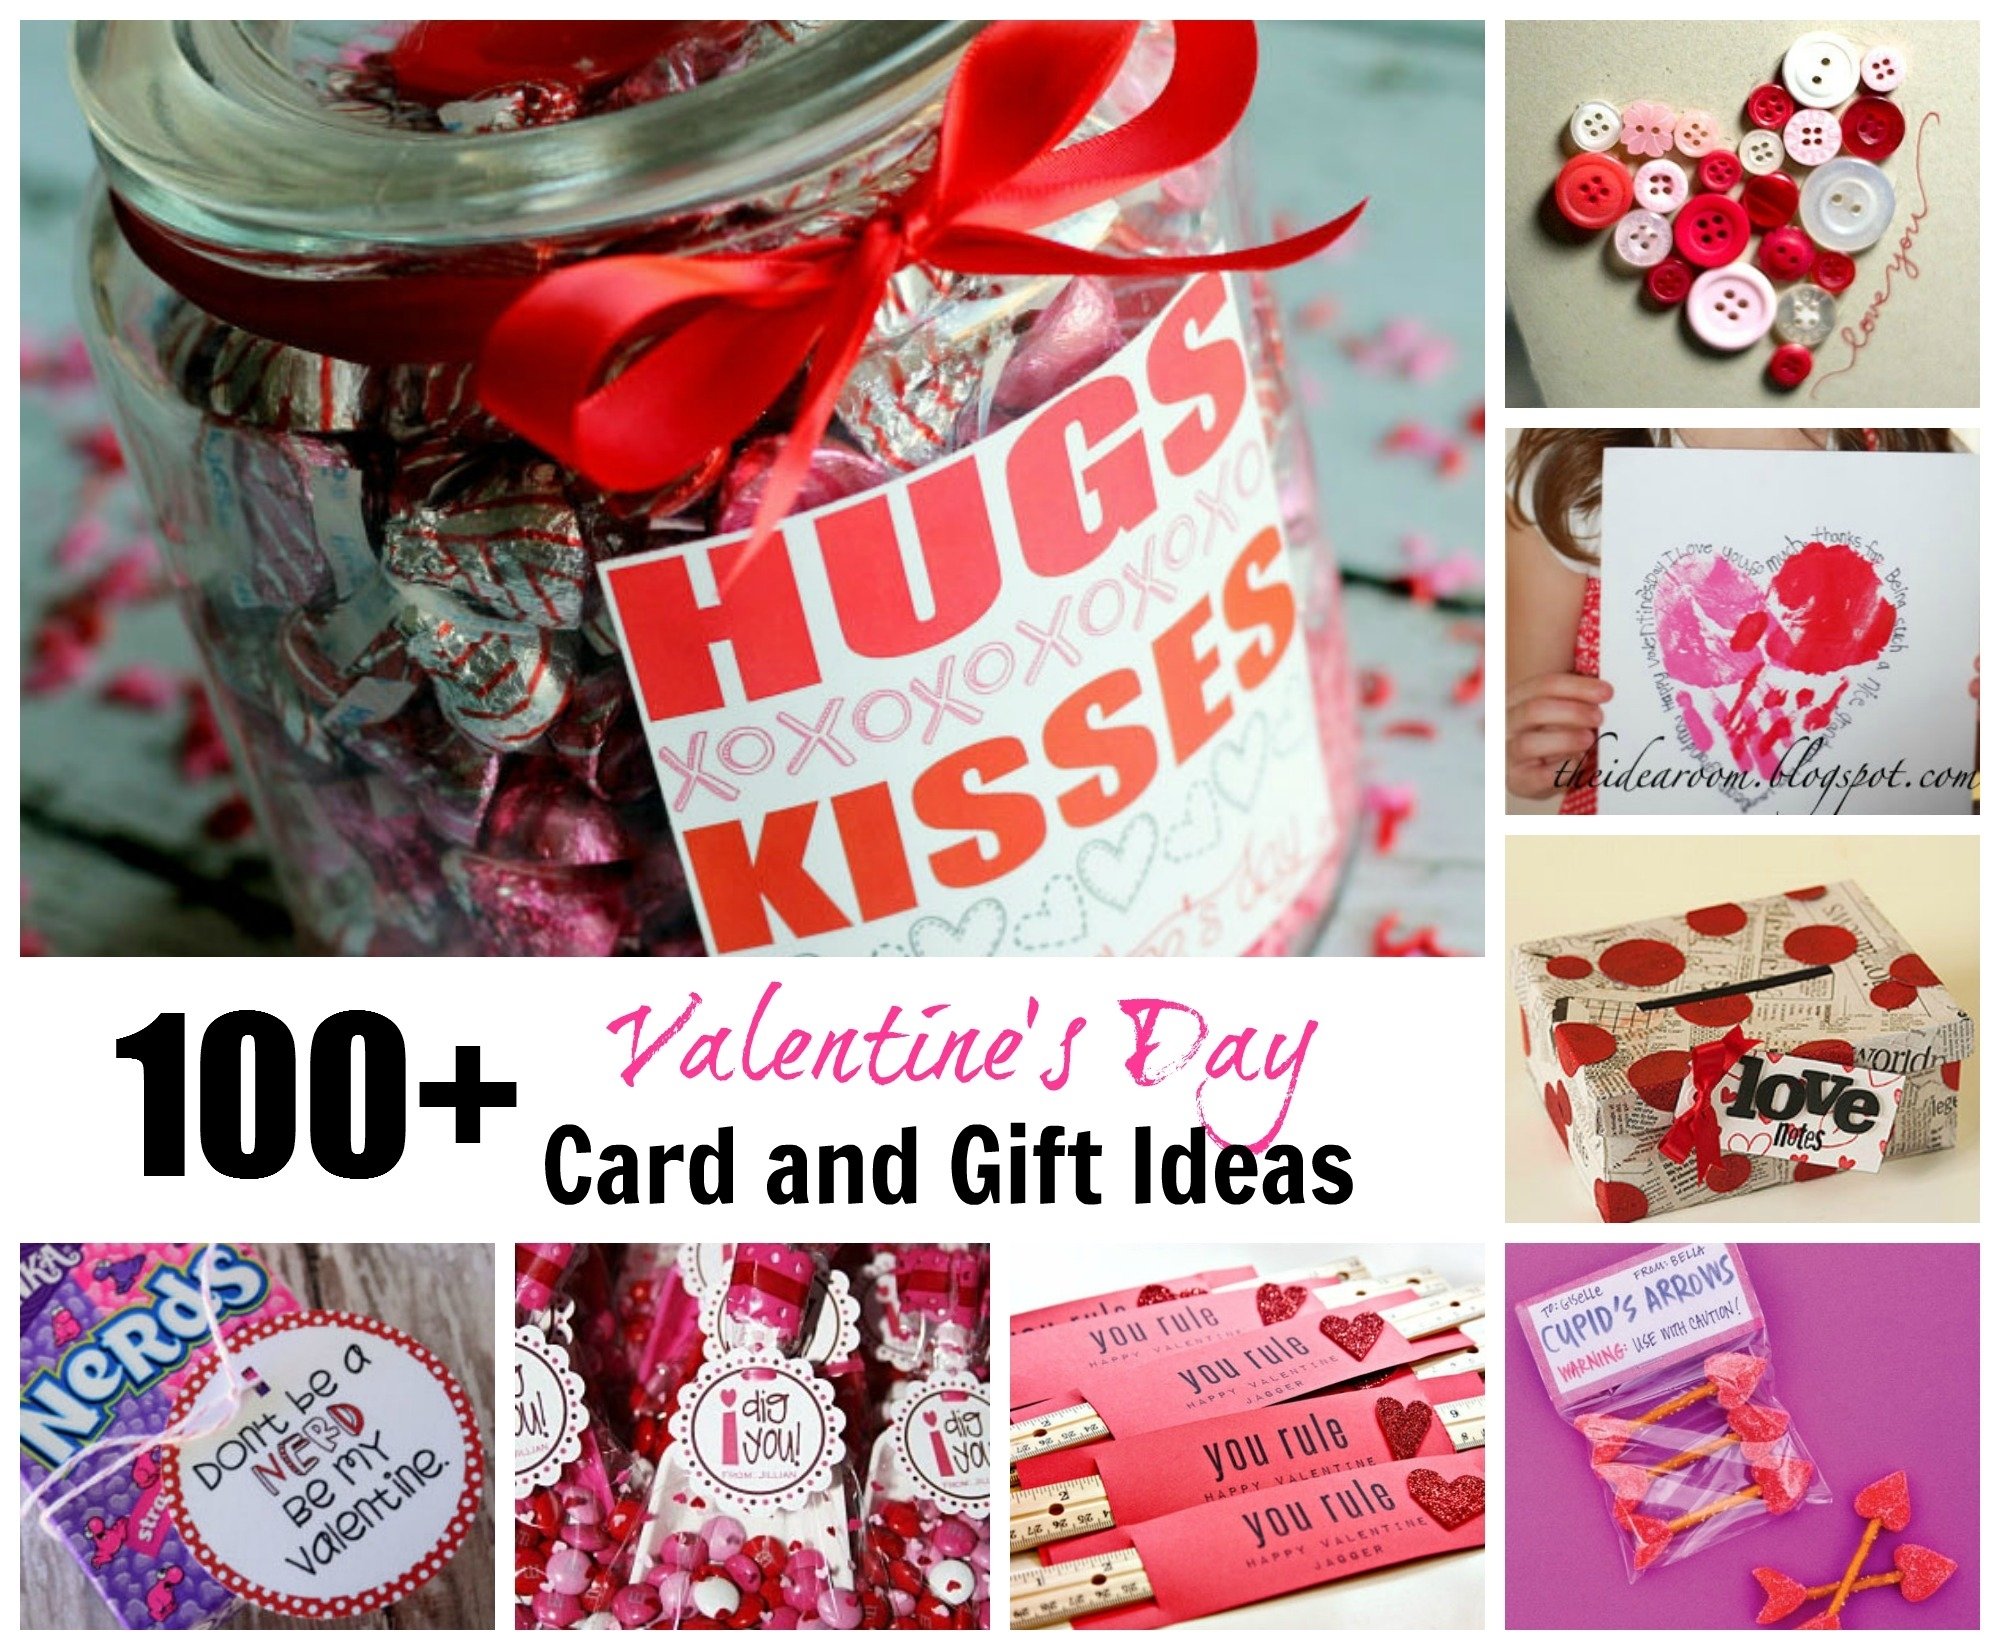 10 Elegant Great Ideas For Valentines Day homemade valentines day ideas for boyfriend startupcorner co 5 2022